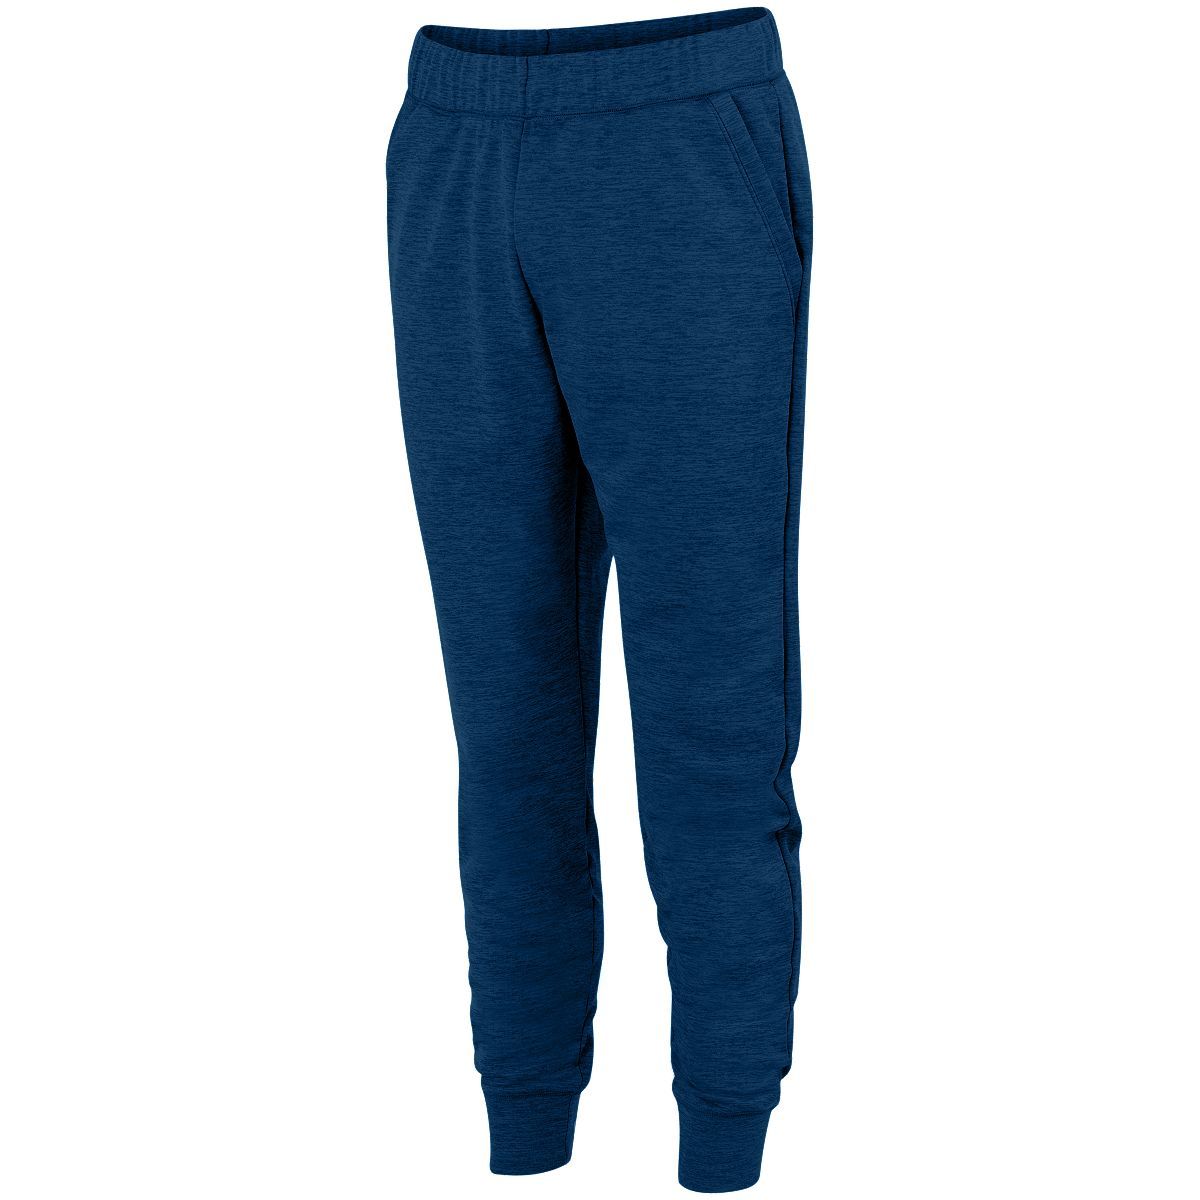 Augusta Sportswear Tonal Heather Fleece Jogger in Navy  -Part of the Adult, Augusta-Products, Tonal-Fleece-Collection product lines at KanaleyCreations.com